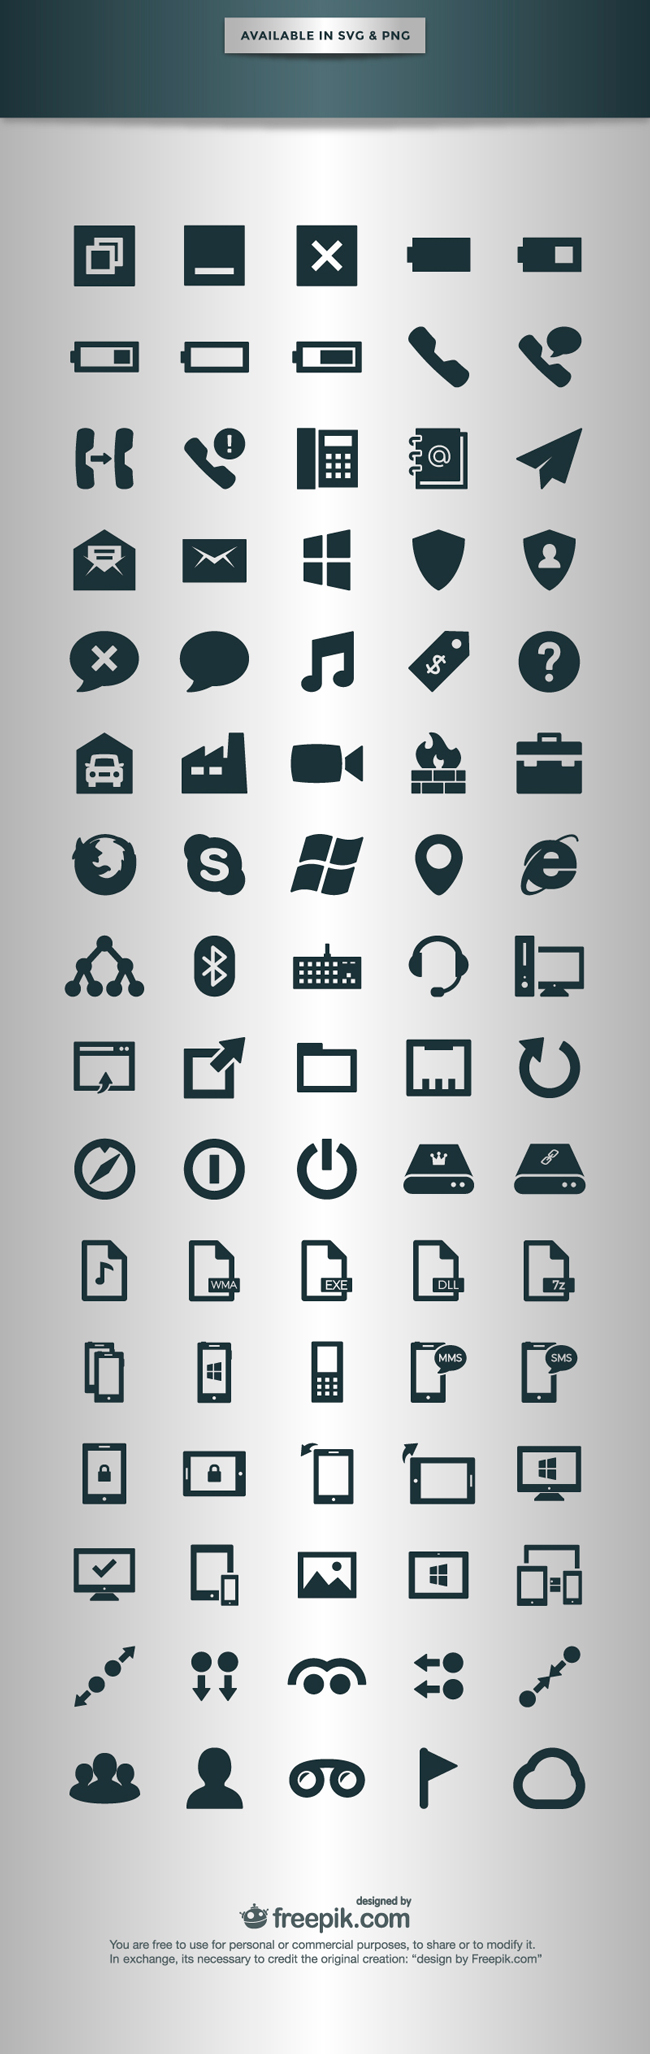 2.Phone Operating System Icons